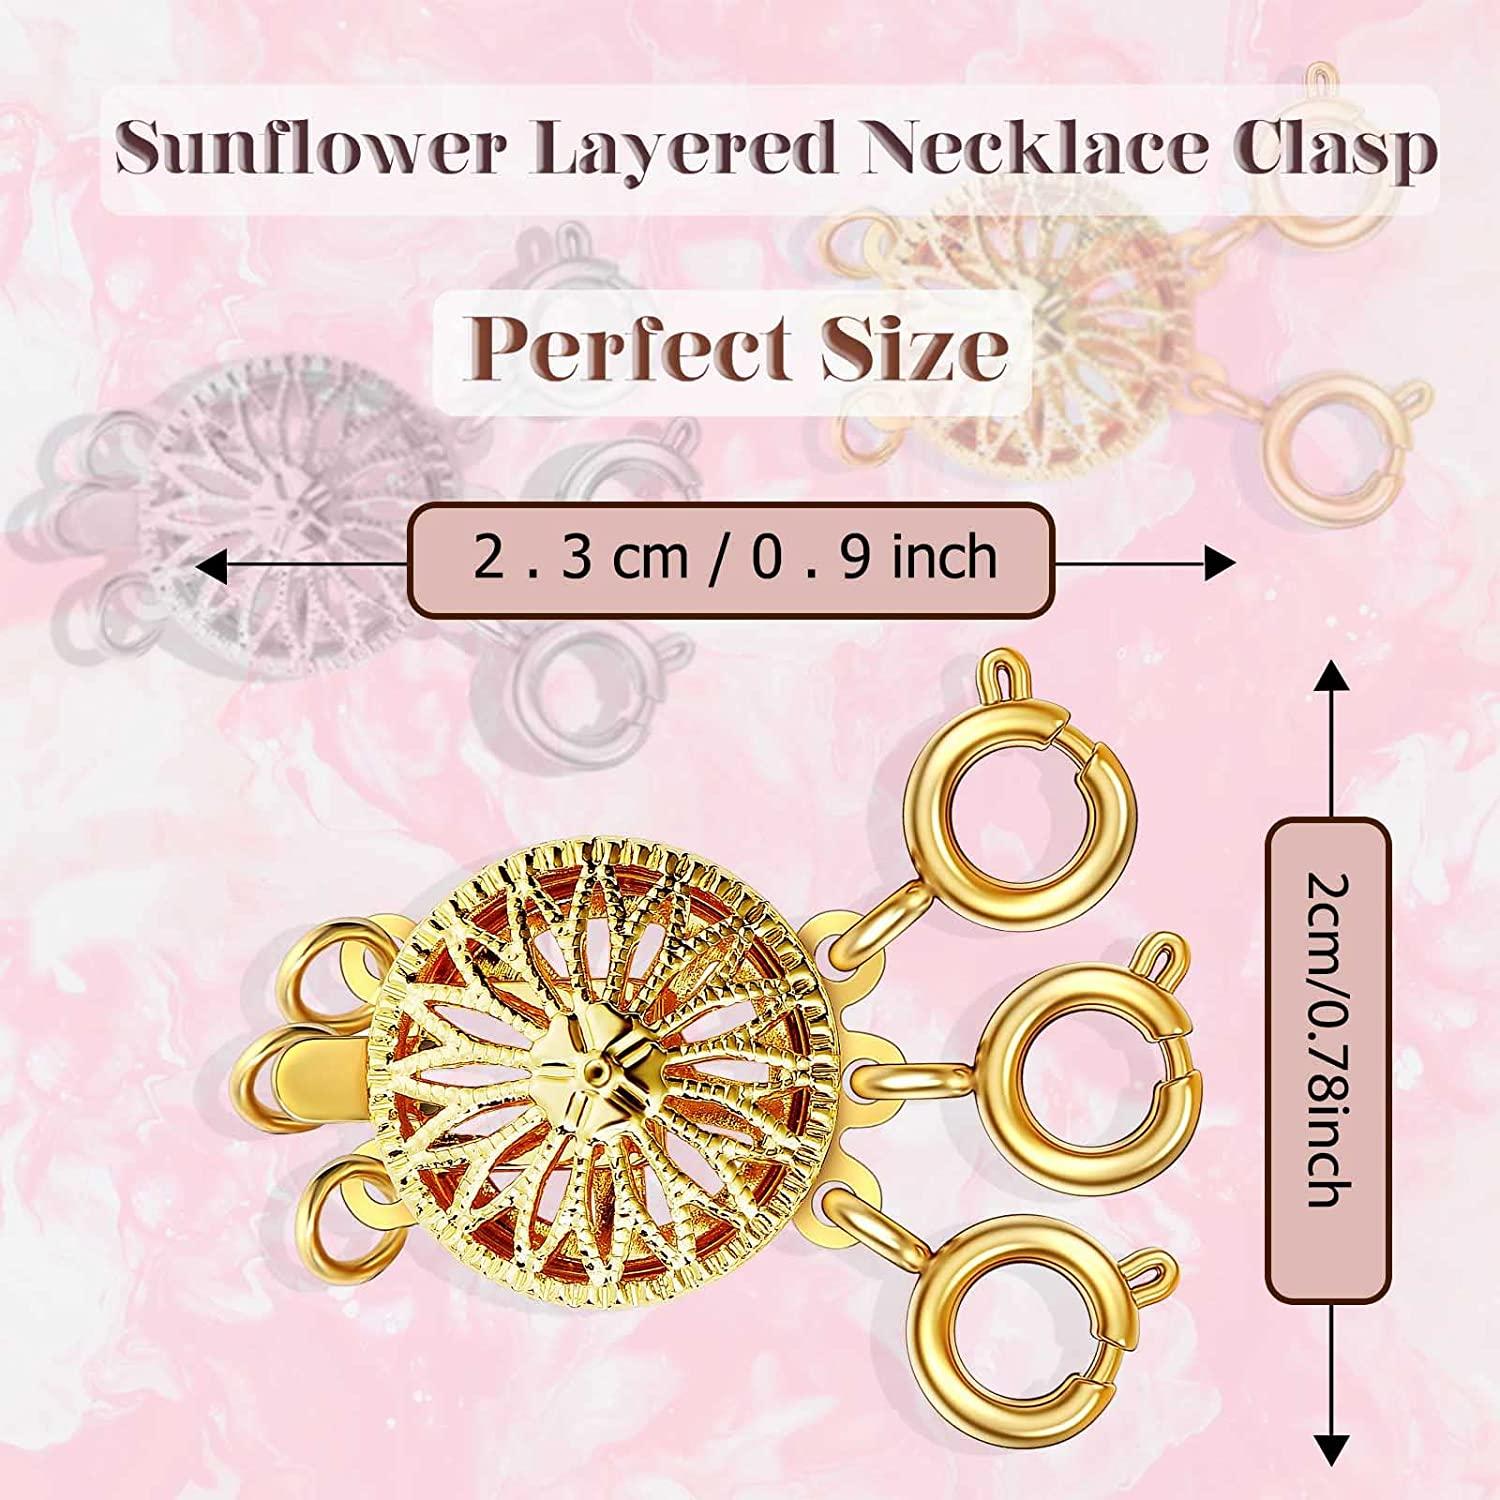 Layered Necklace Clasp – Perpetual Jewelry Design